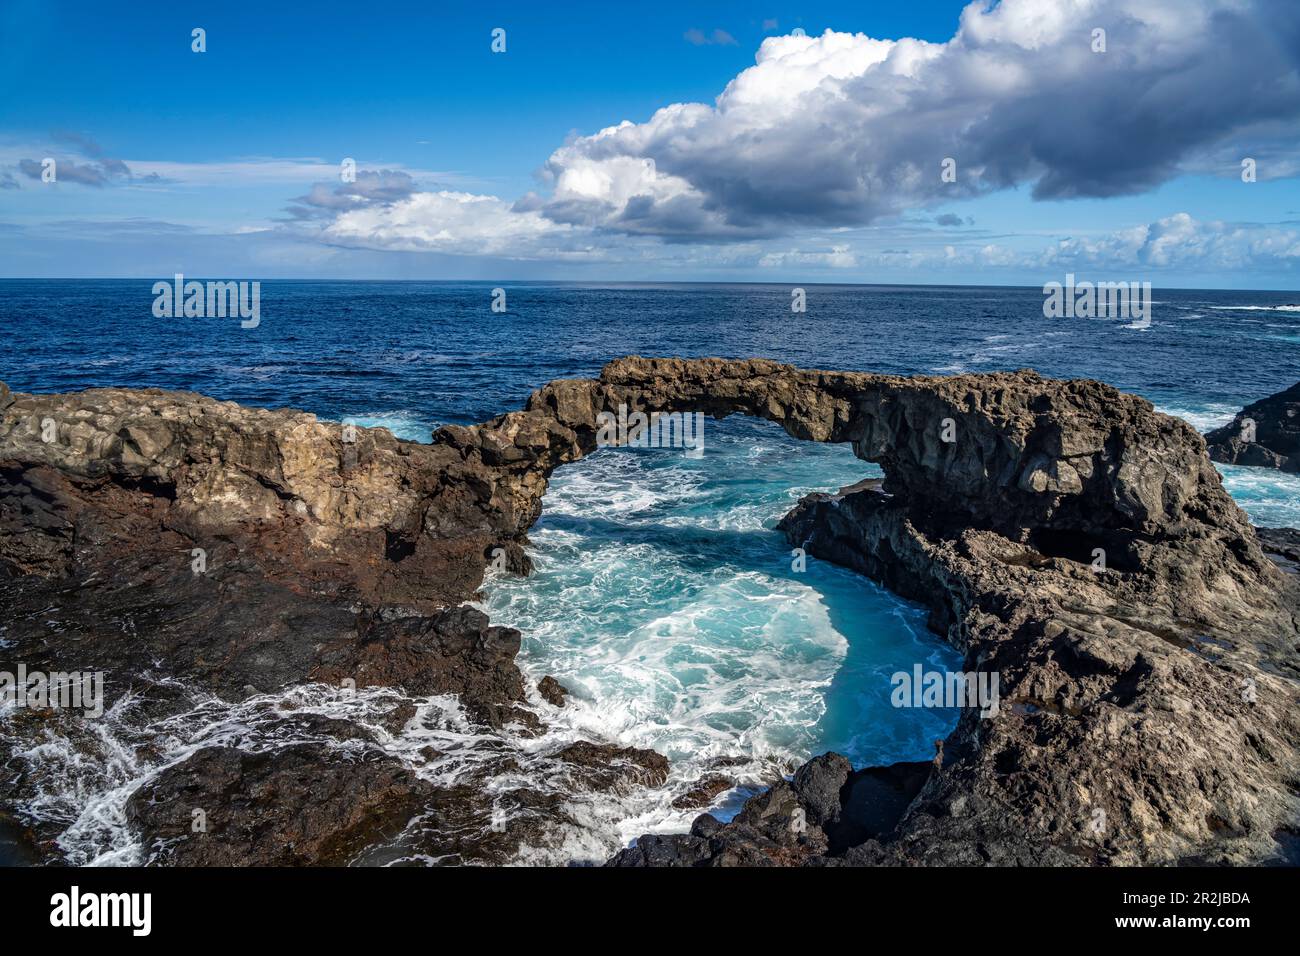 The rock arch of Charco Manso, El Hierro, Canary Islands, Spain Stock Photo